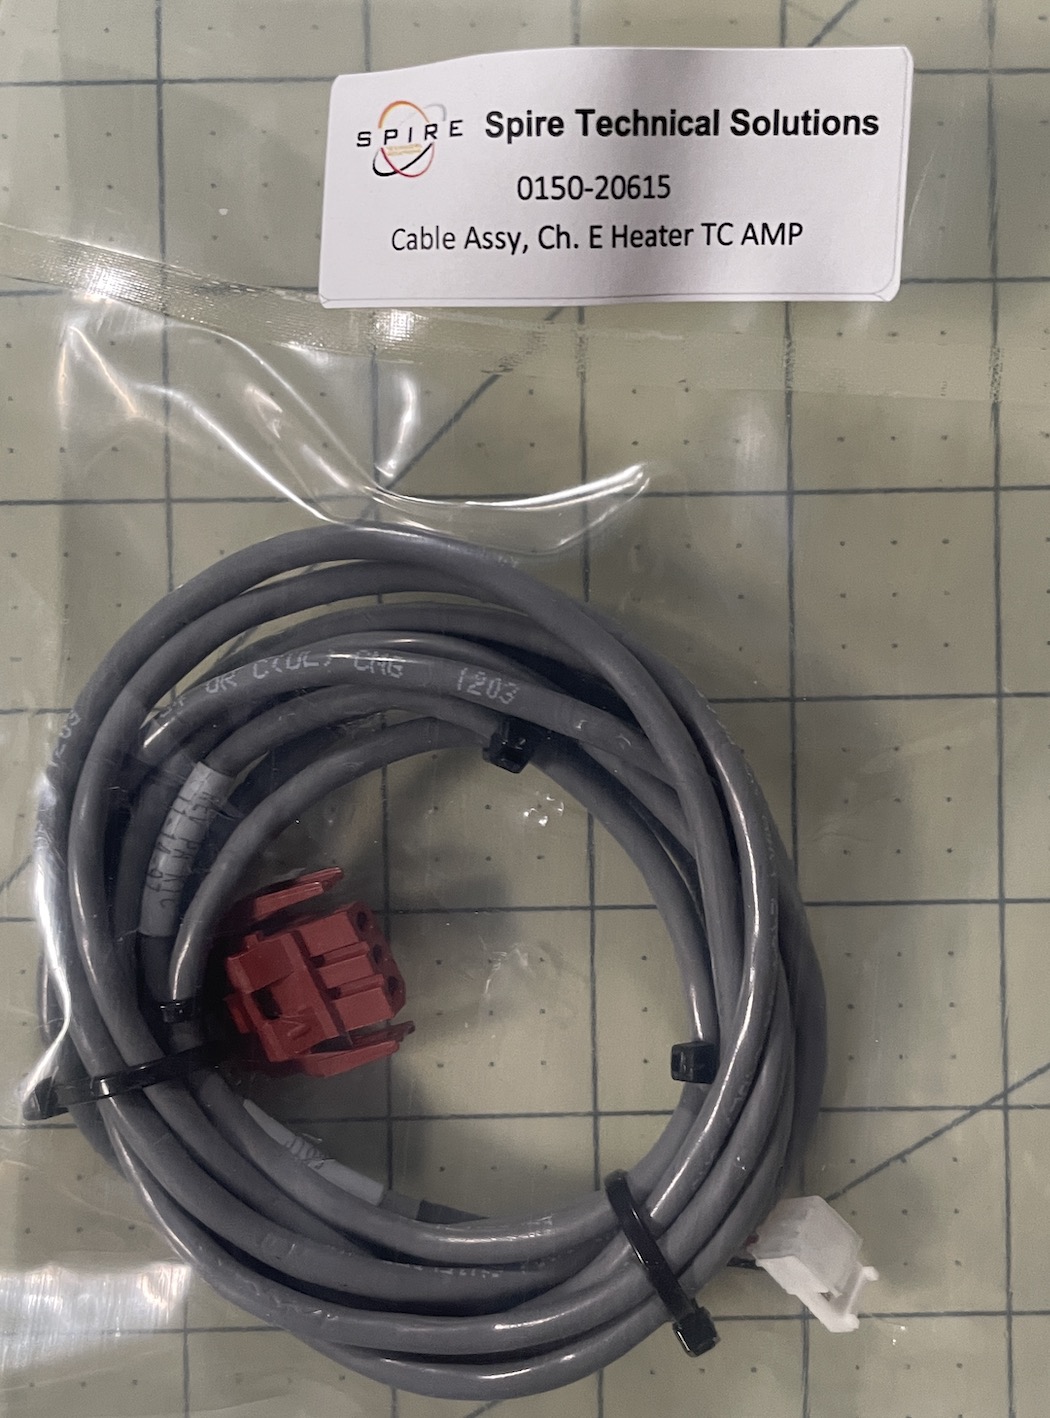 Cable Assy, CH. E Heater TC AMP